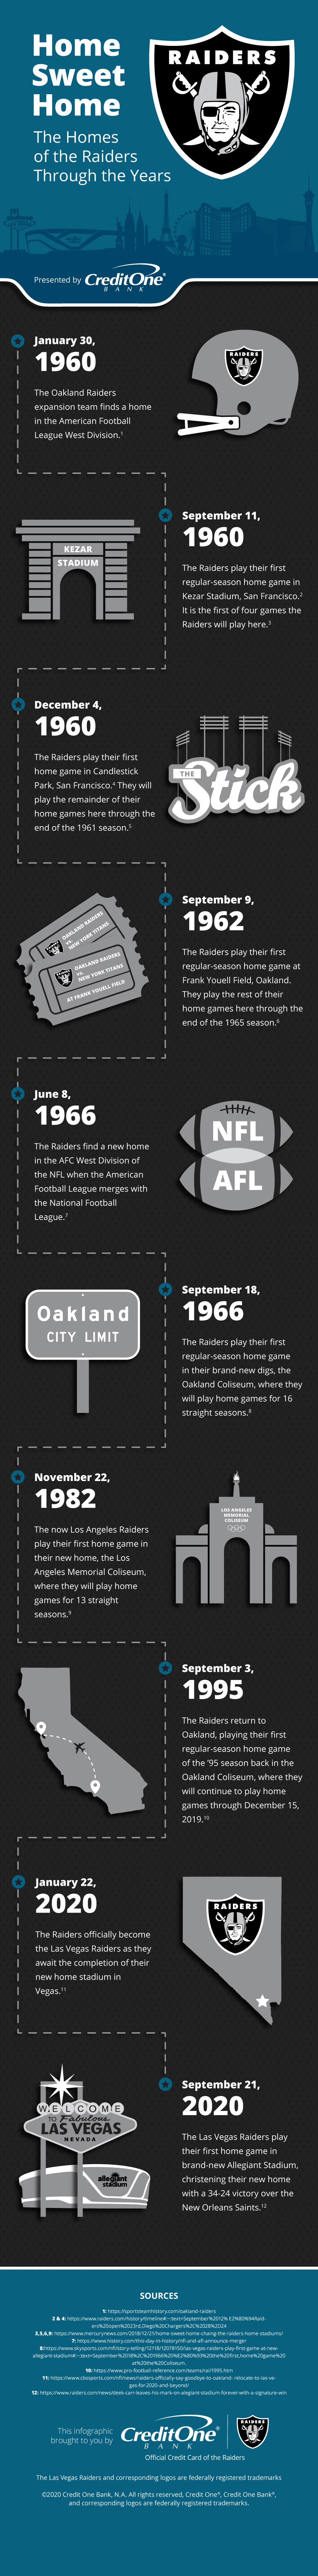 Homes of the Raiders Through the Years [Infographic]